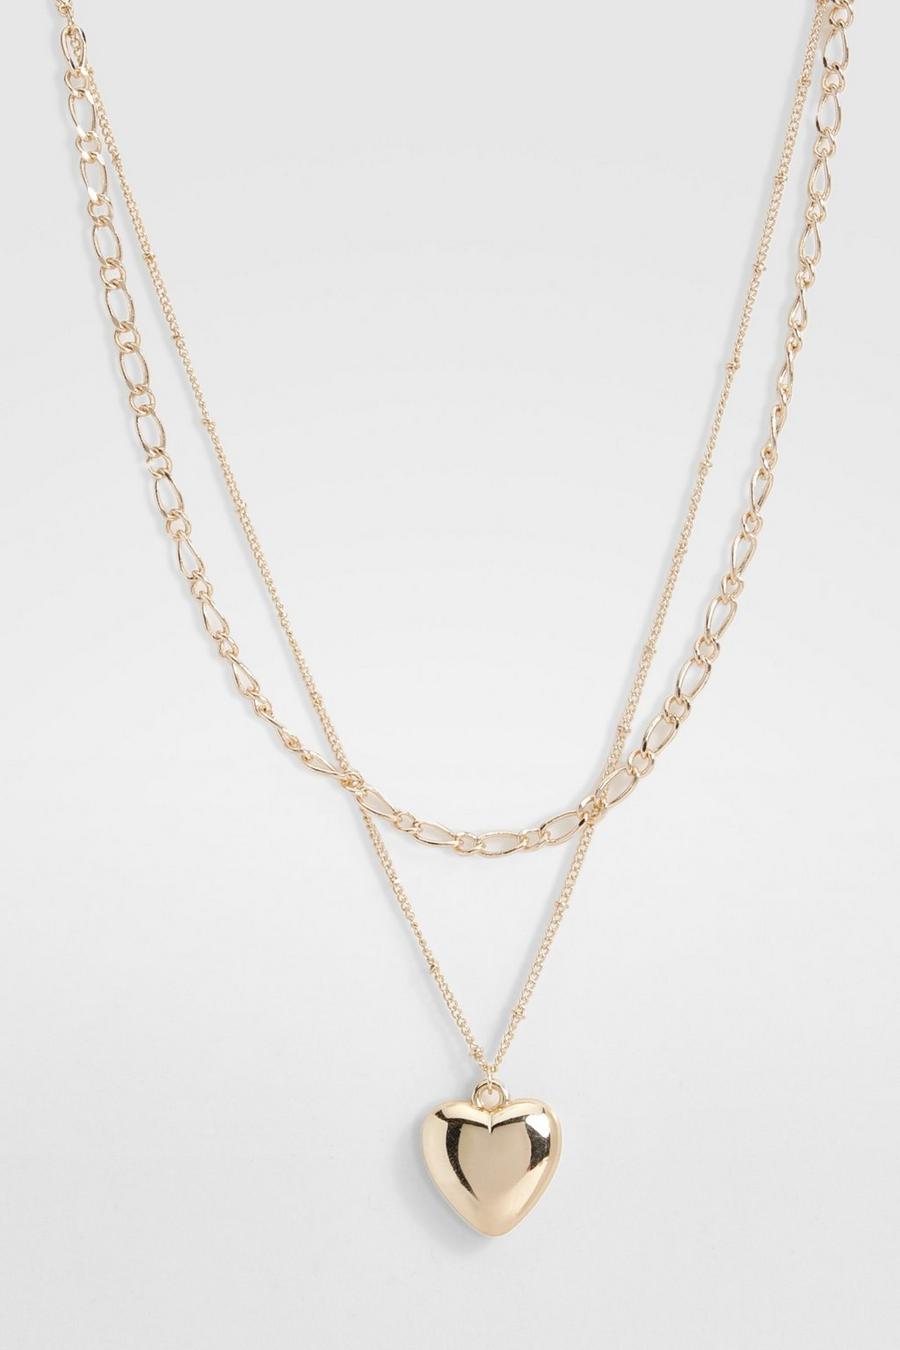 Gold Statement Heart Layered Necklace 